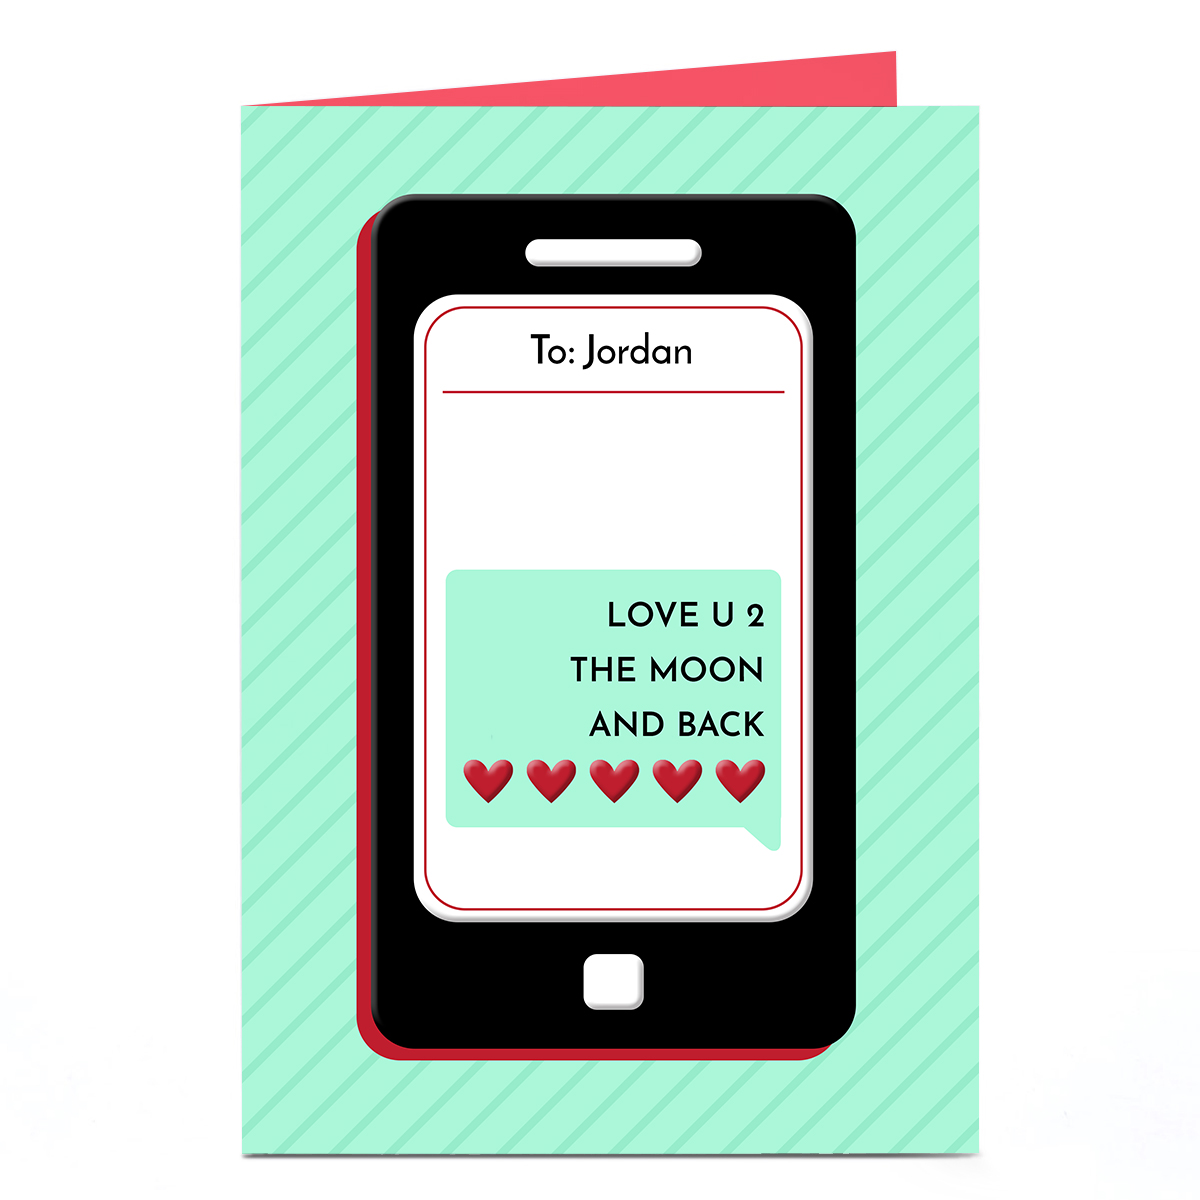 Personalised Valentine's Day Card - iPhone Message